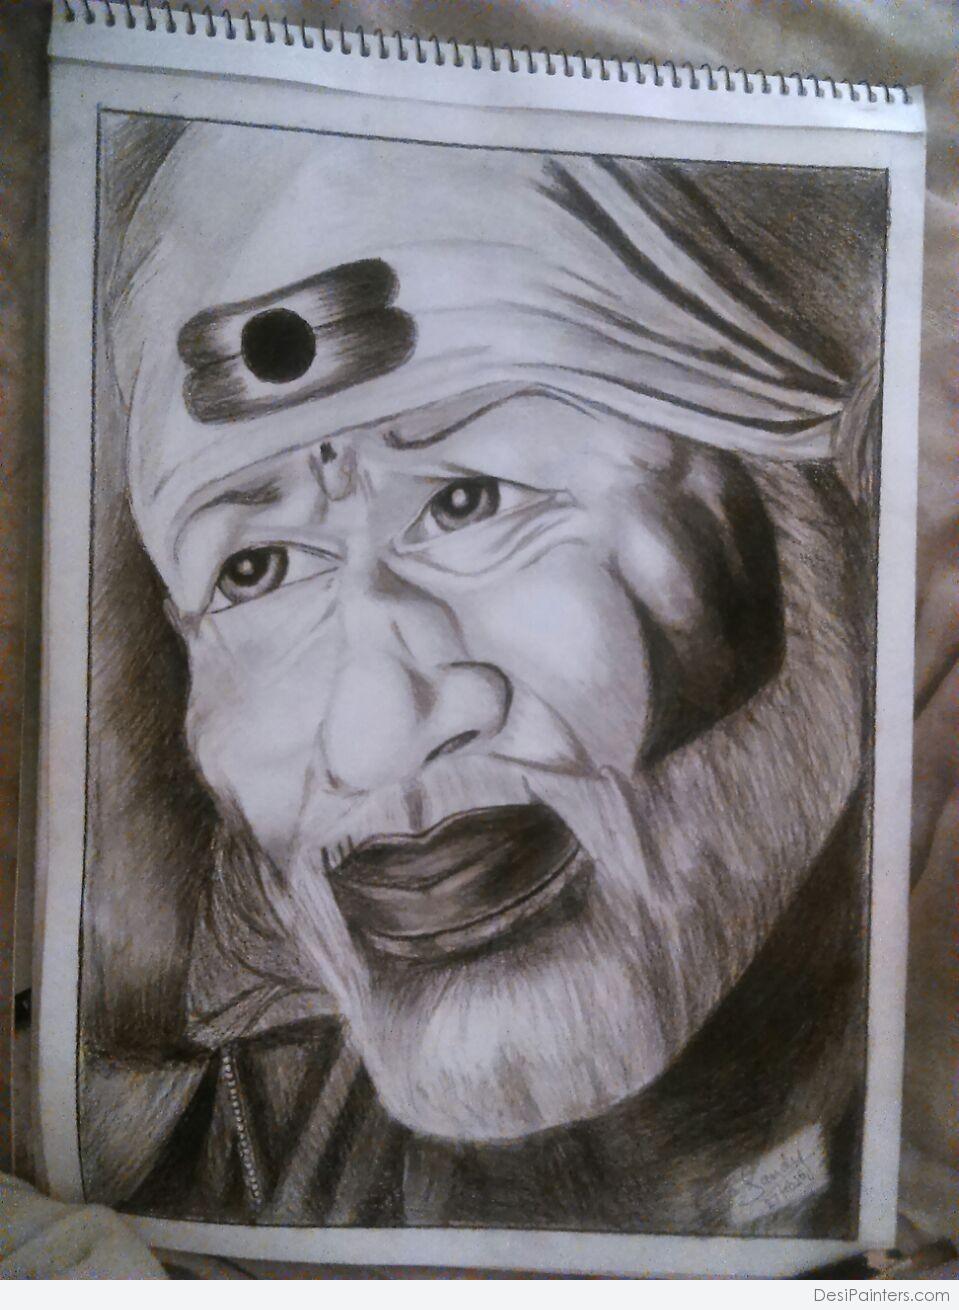 Dr. Sachin Raut on LinkedIn: A pencil sketch of Baba done 20 years ago.